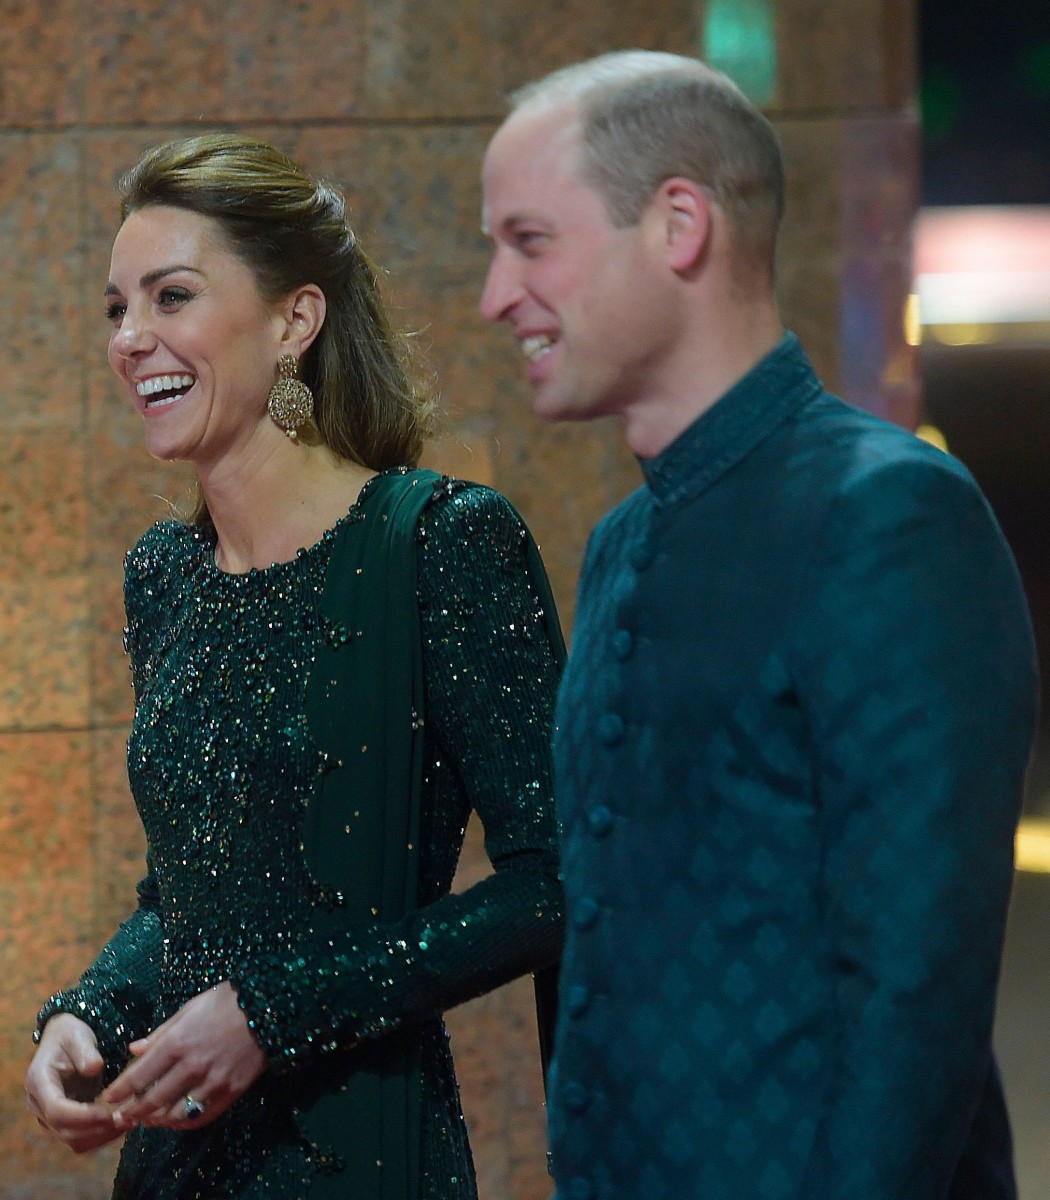 William and Kate oversee the Royal Foundation, which will be awarding the grants